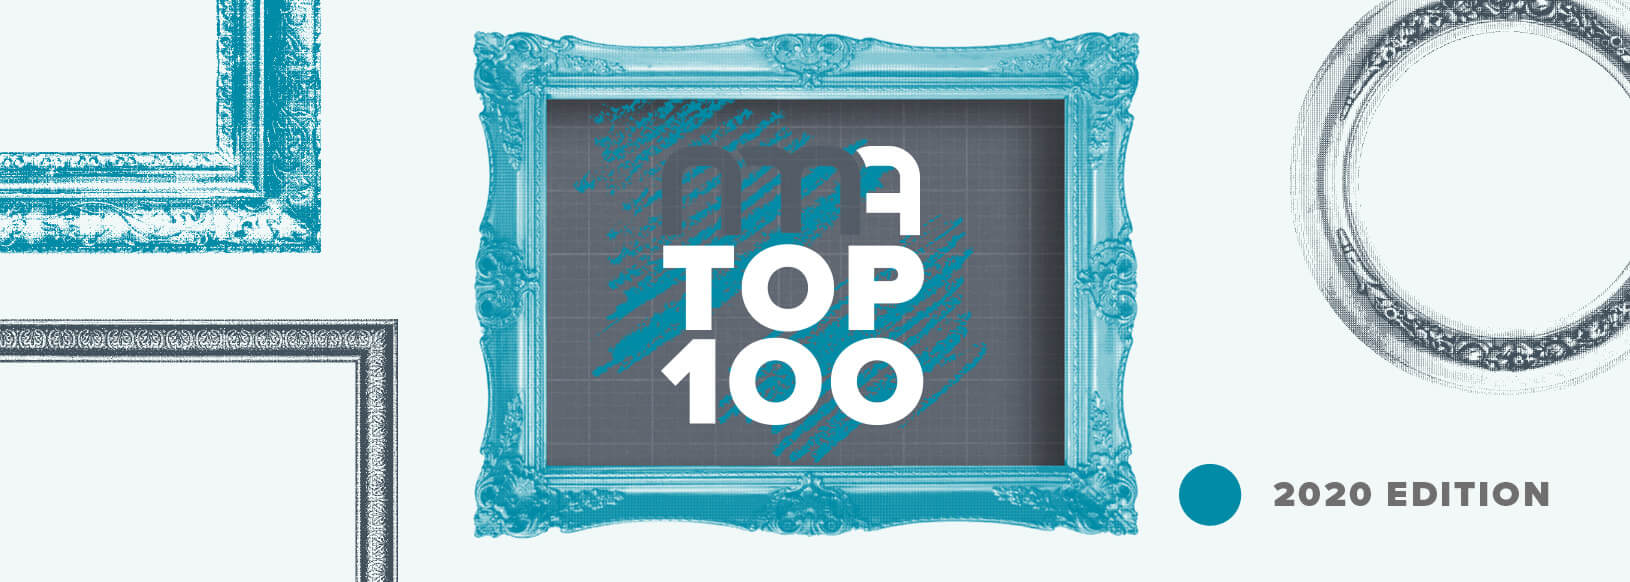 Becketts awarded NMA Top 100 firm 2020